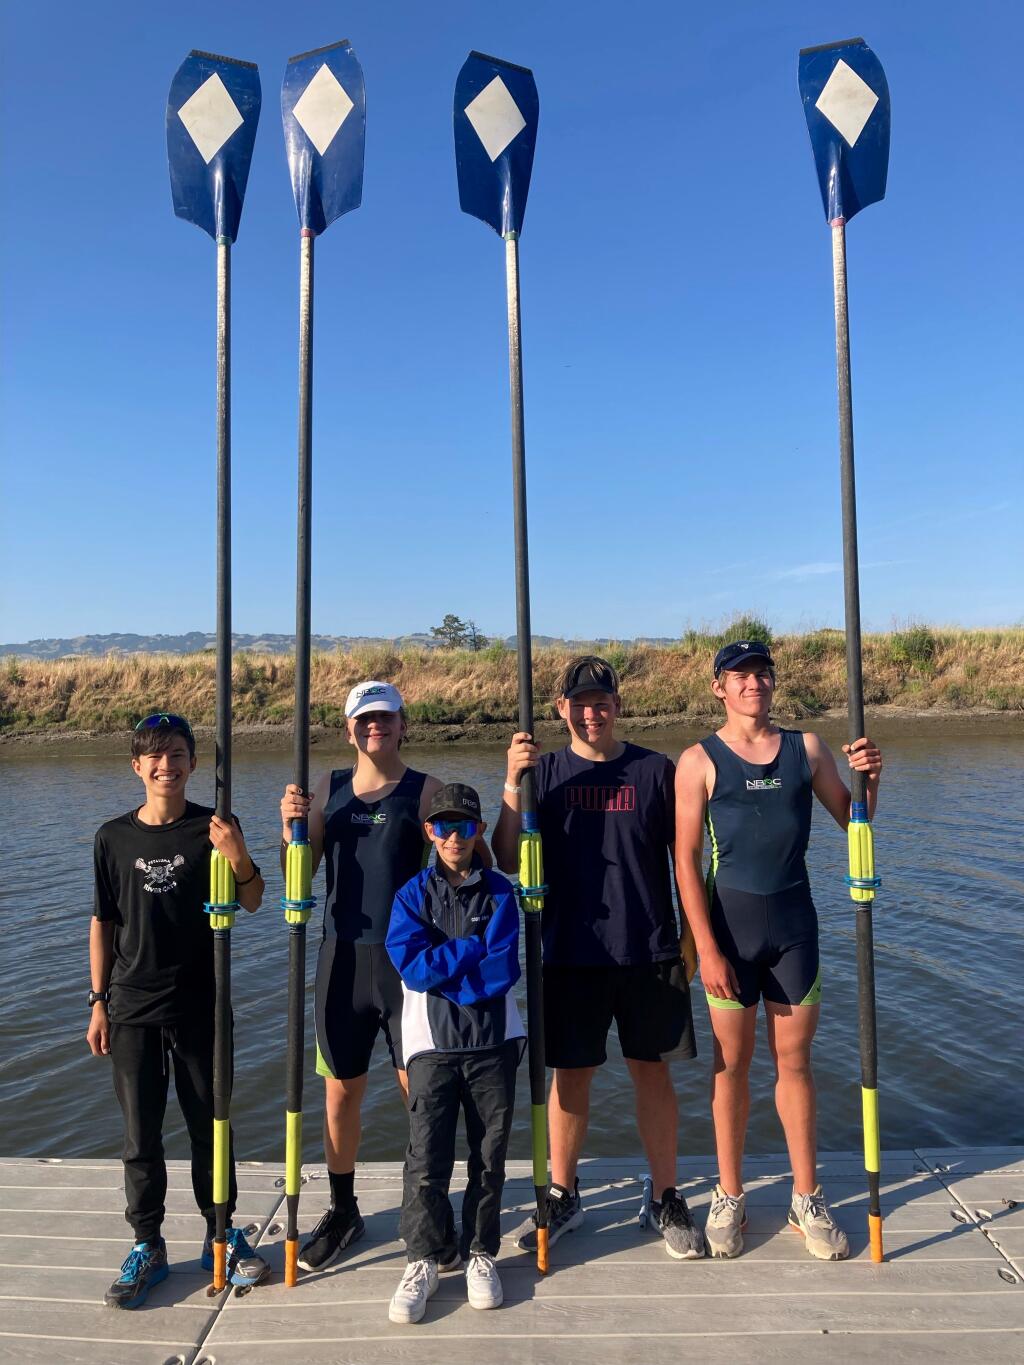 The North Bay Youth Rowing Club’s 17-under 4+ team of (back, left to right) Tystan Morse, Kole Dagle, Peter Carpenter, Rocco Smith and (front) coxswain Cody Davis has qualified for the National Youth Rowing Championships. (PAM HUGHES PHOTO)